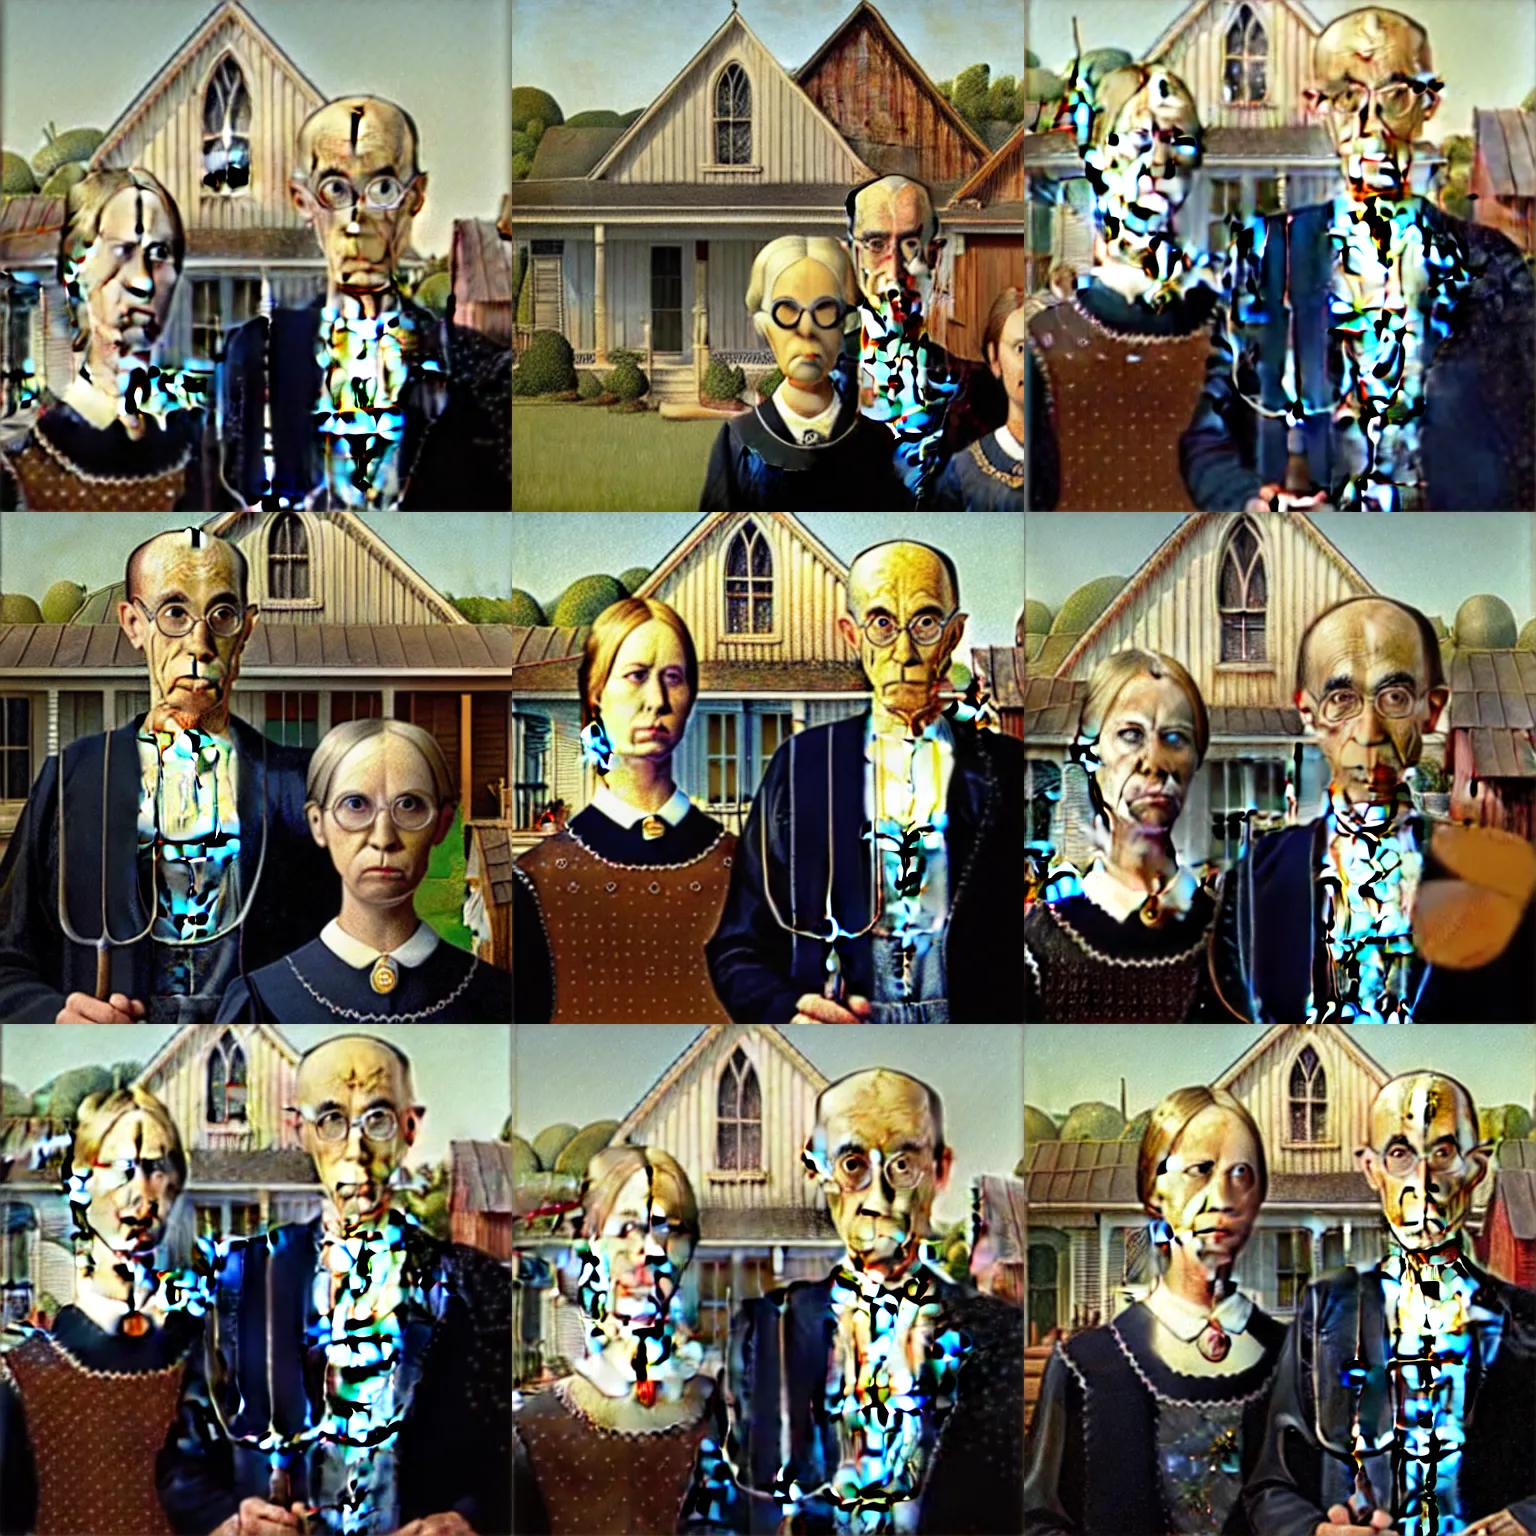 Prompt: American Gothic by Grant Wood, but it's minions instead